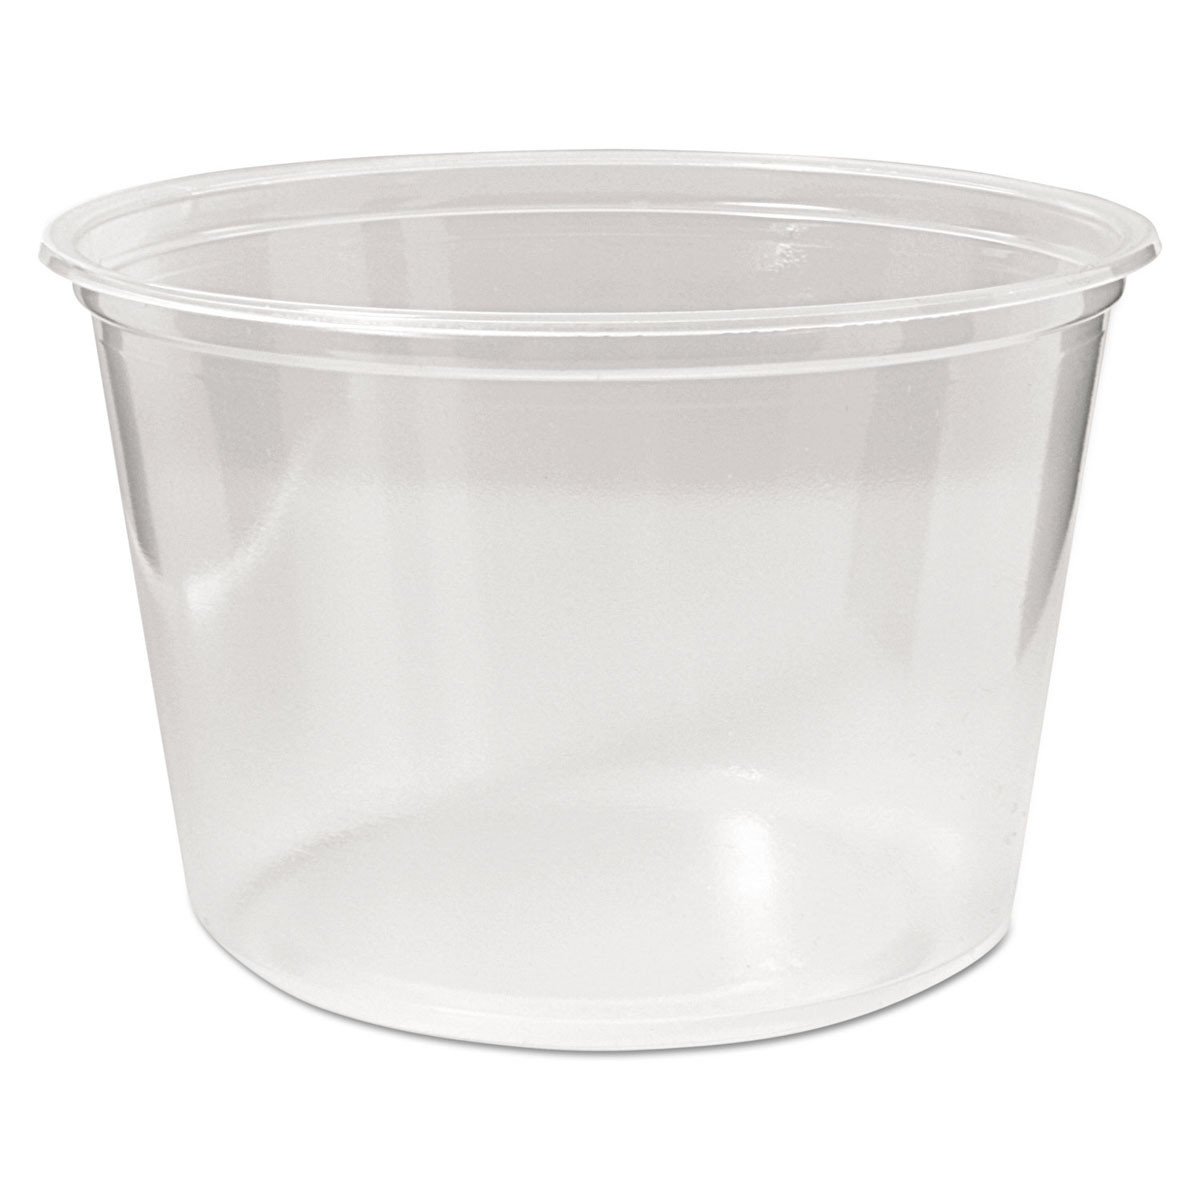 16oz DELI CONTAINER WITH LID - 5 x 2 1/2 TALL - 250/CASE - Wow Plastics,  Inc.